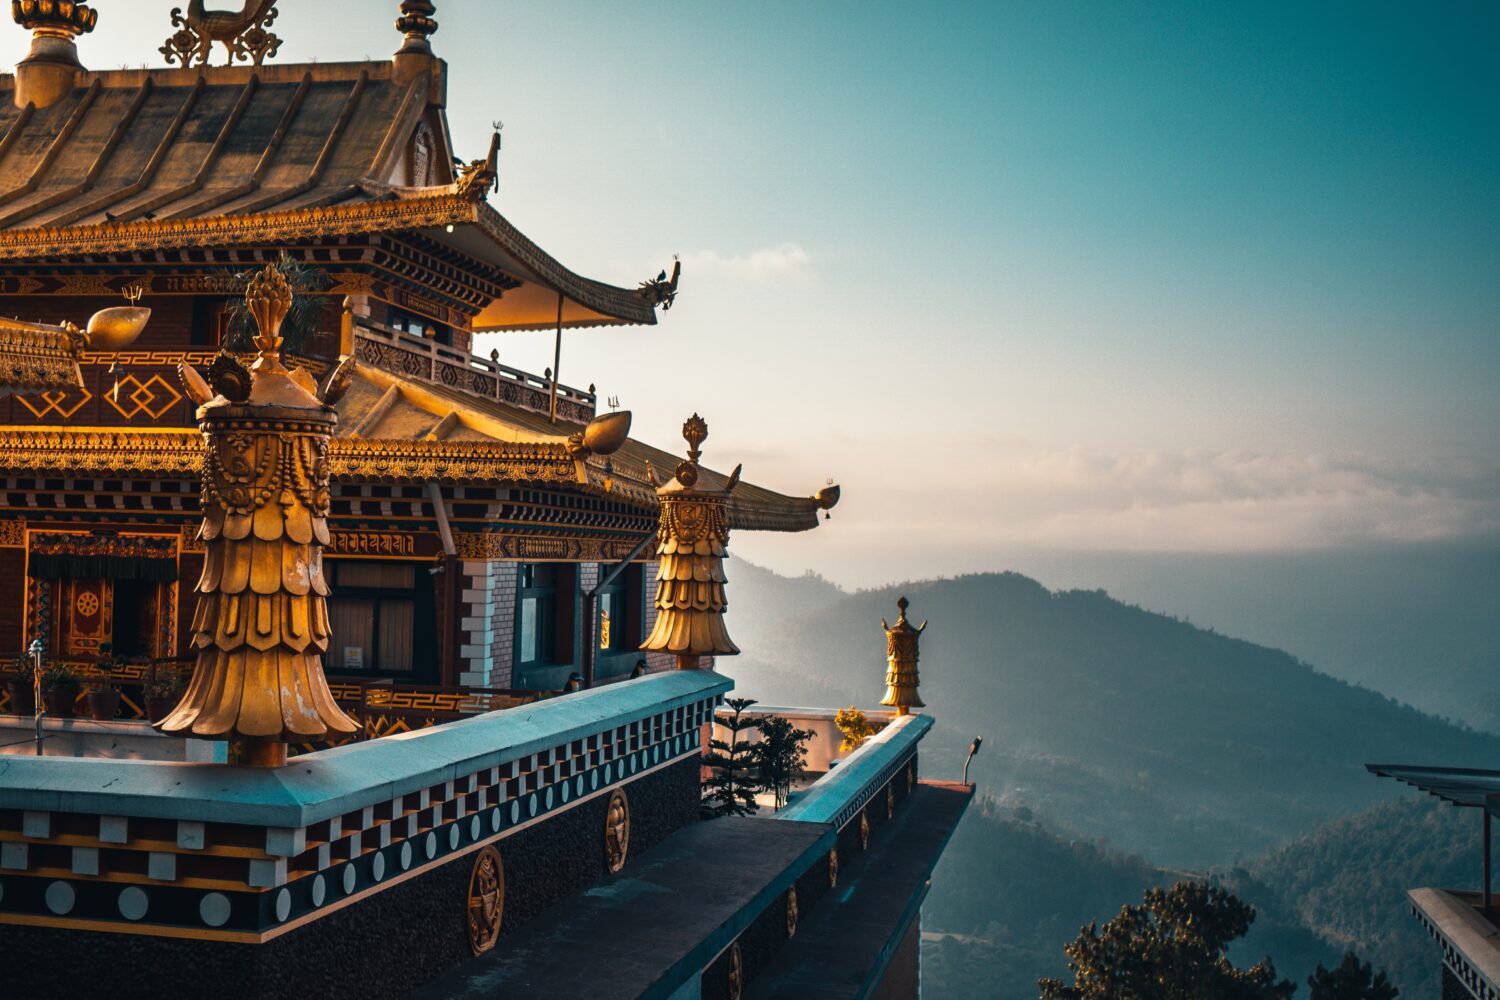 An ornate temple with gold detail overlooks the mountains in the background - Nepal Trail Running and Wellness Retreat - Run Wild Retreats